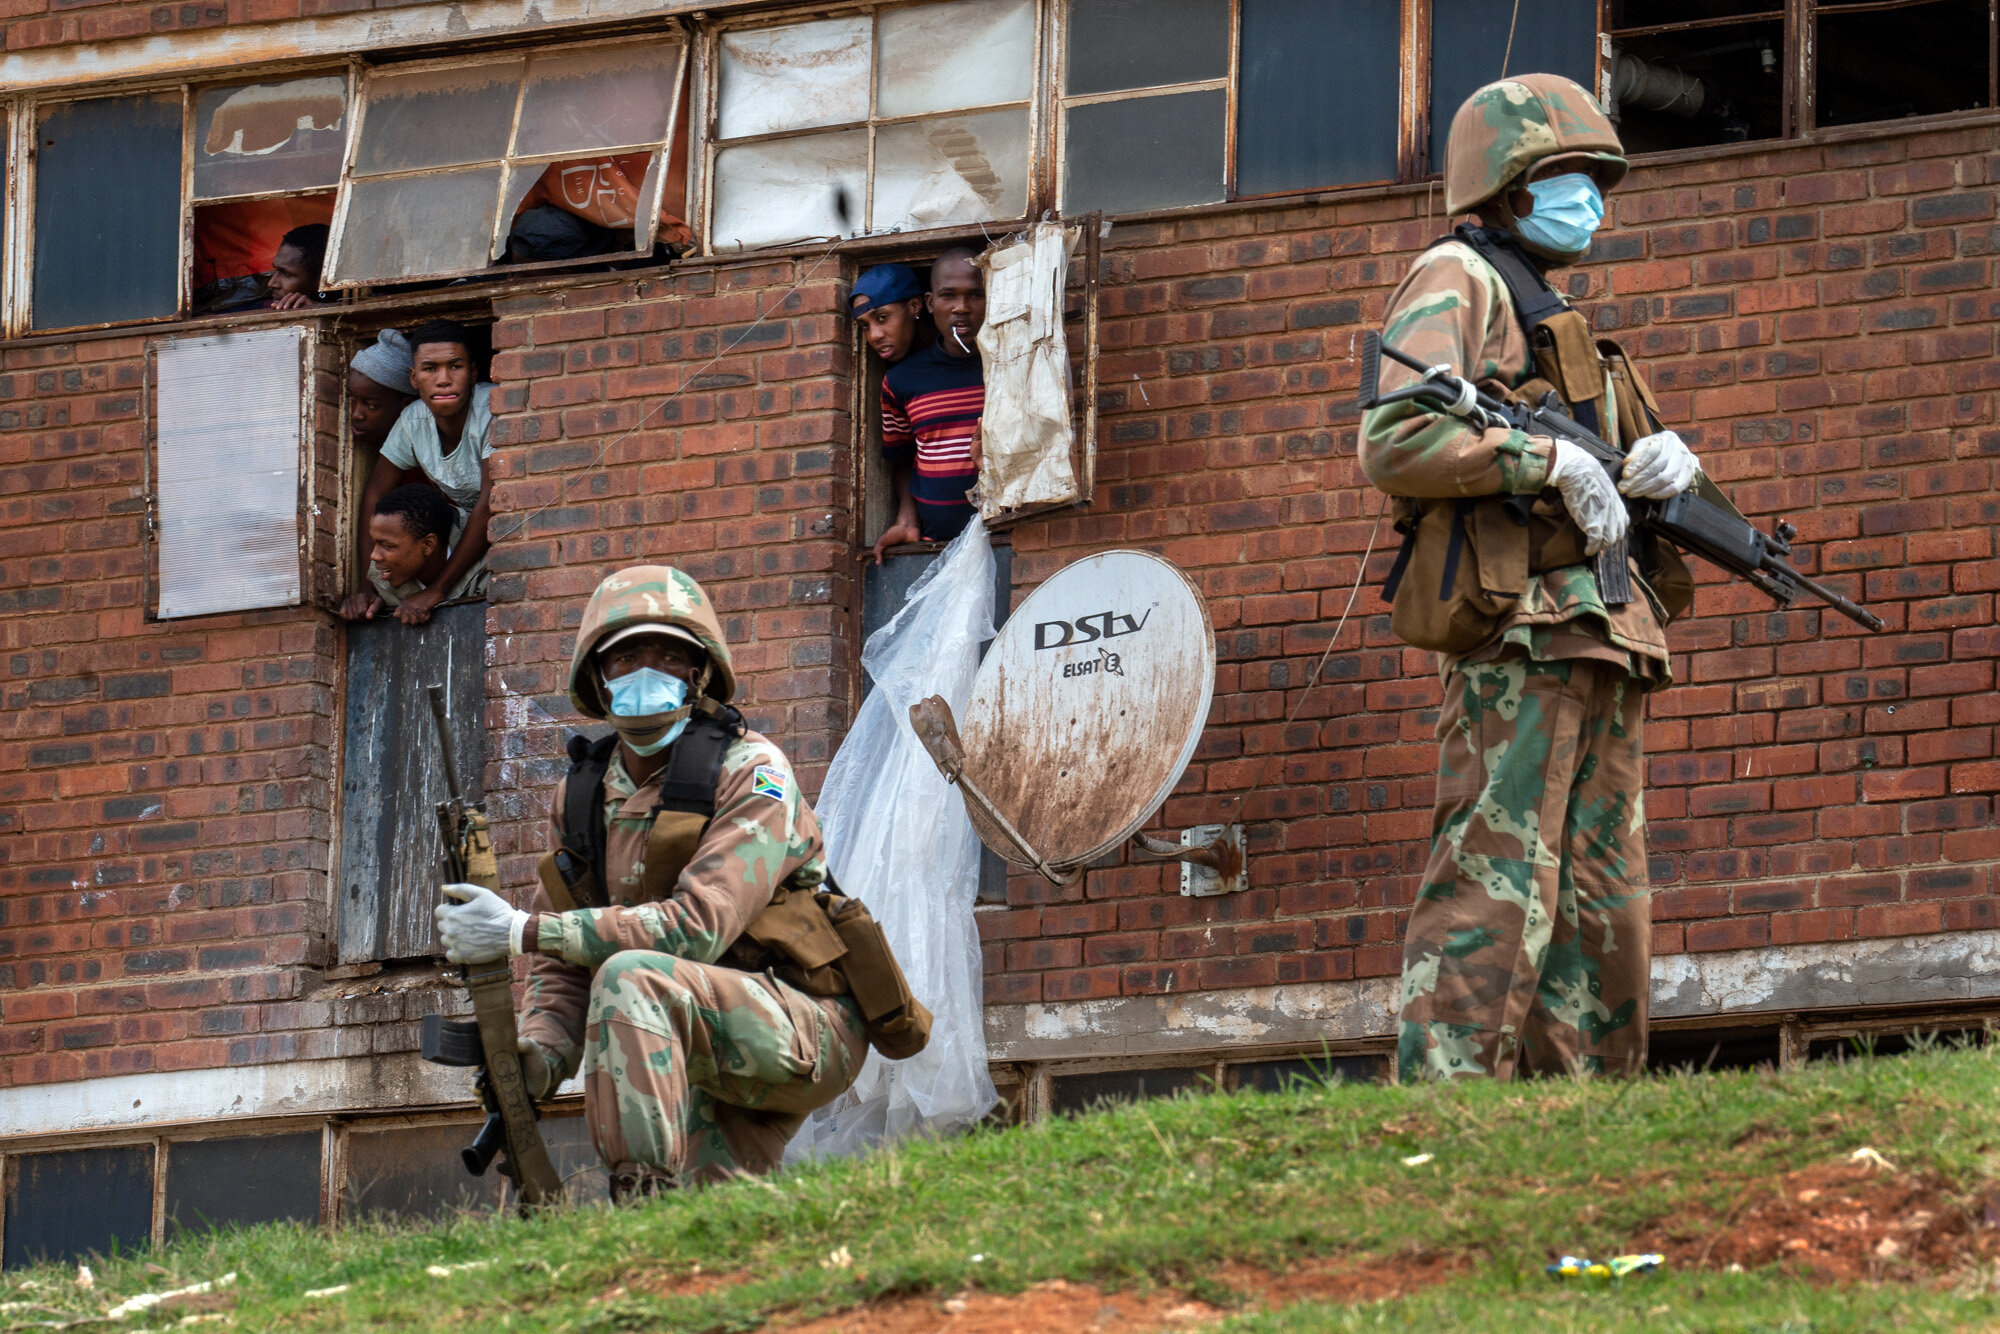  South African National Defense Forces patrol the Men's Hostel in the densely populated Alexandra township east of Johannesburg on March 28, 2020, enforcing a strict lockdown in an effort to control the spread of the coronavirus. (AP Photo/Jerome Del